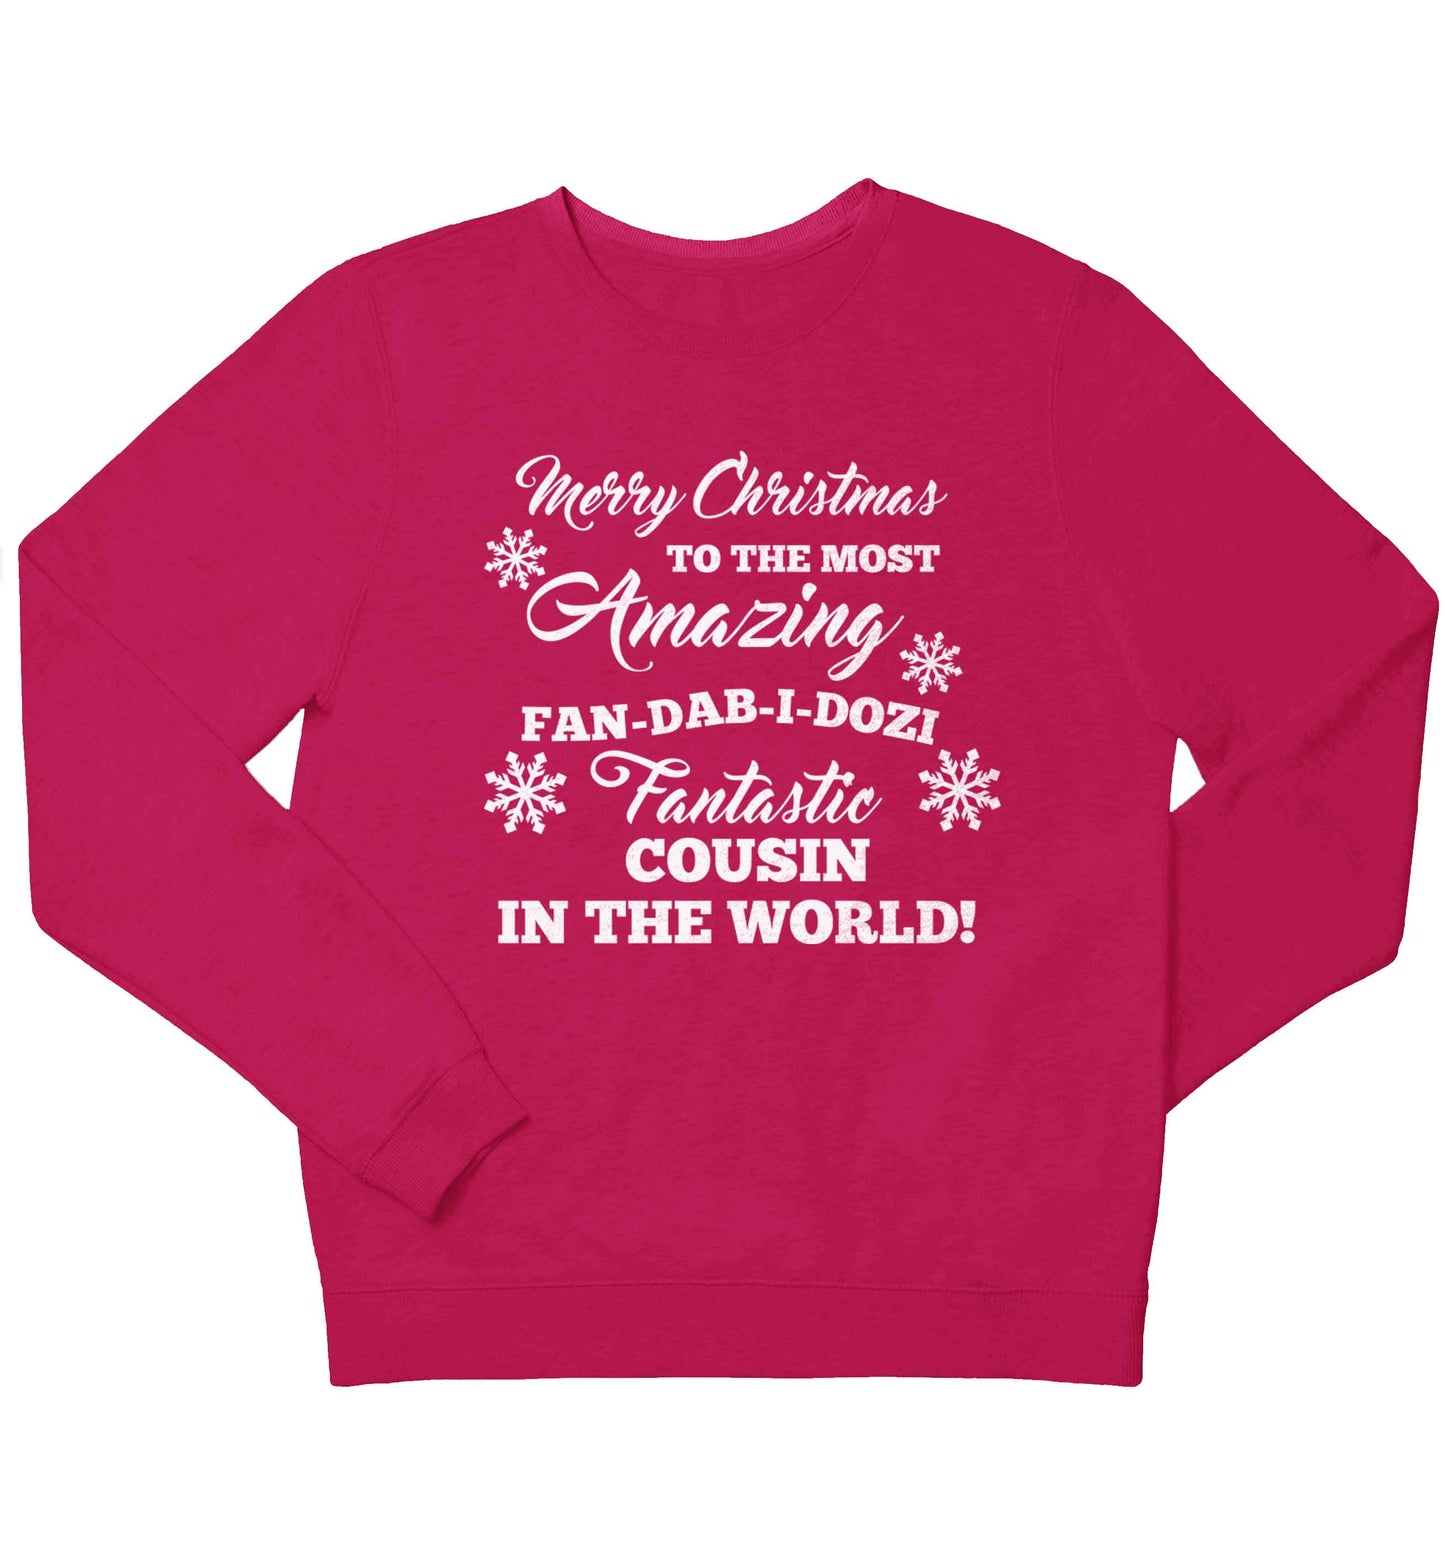 Merry Christmas to the most amazing fan-dab-i-dozi fantasic Cousin in the world children's pink sweater 12-13 Years